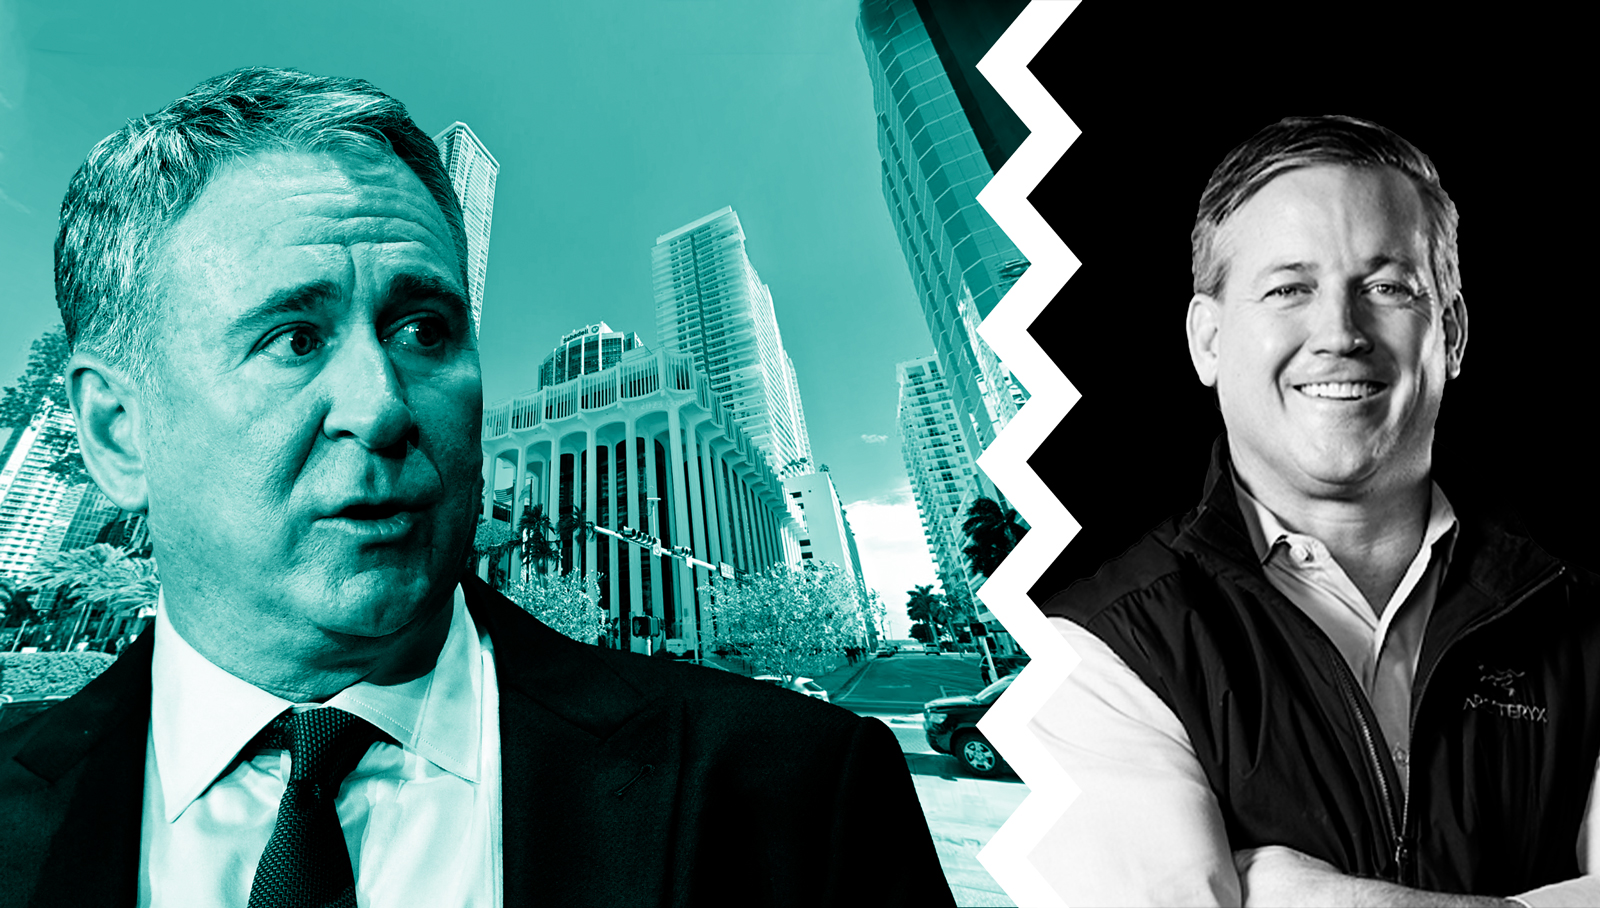 Ken Griffin with 1201 Brickell Bay Drive in Miami and Sterling Bay CEO Andy Gloor